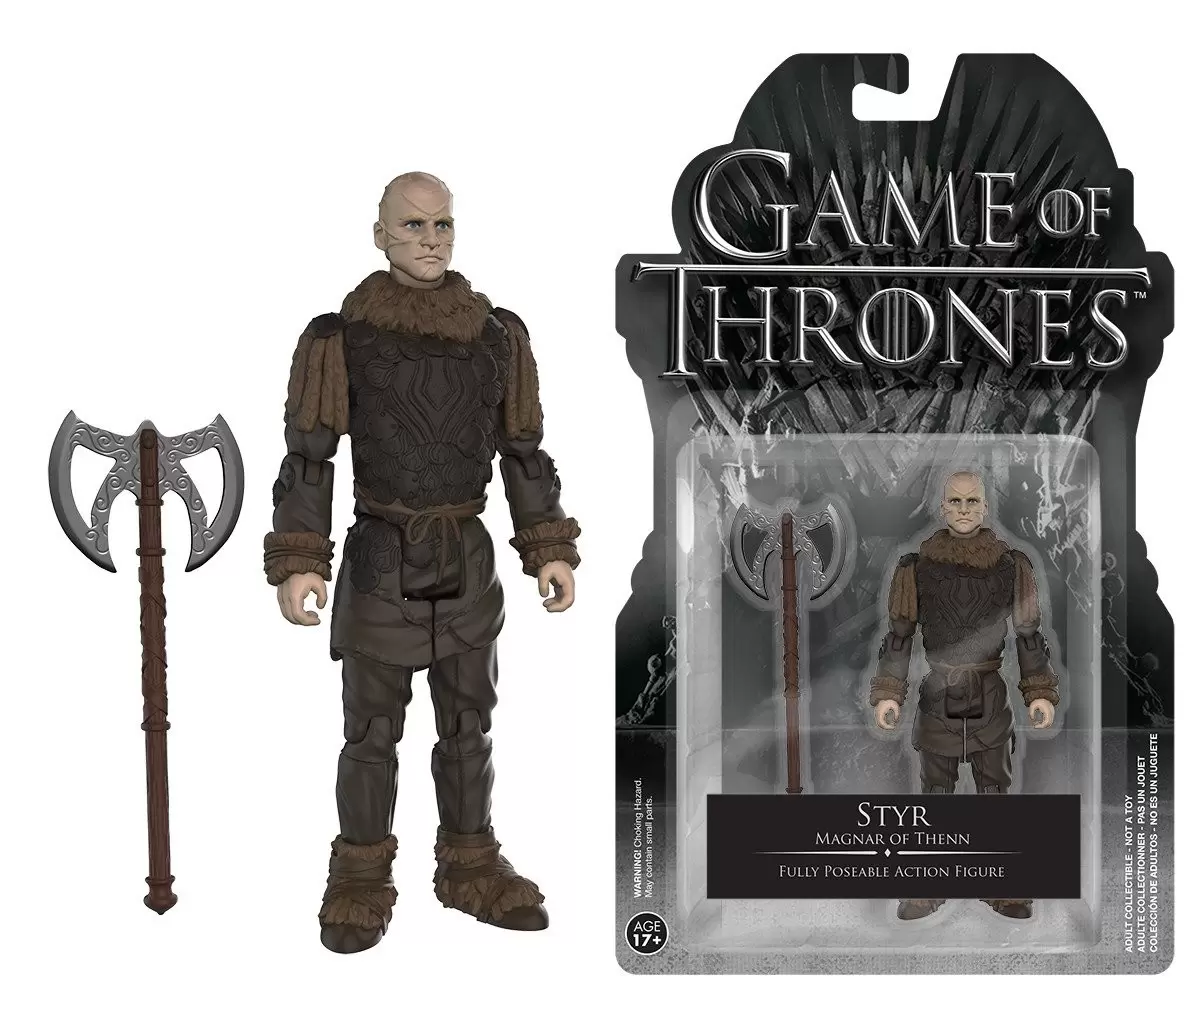 Game of Thrones - Game of Thrones - Styr